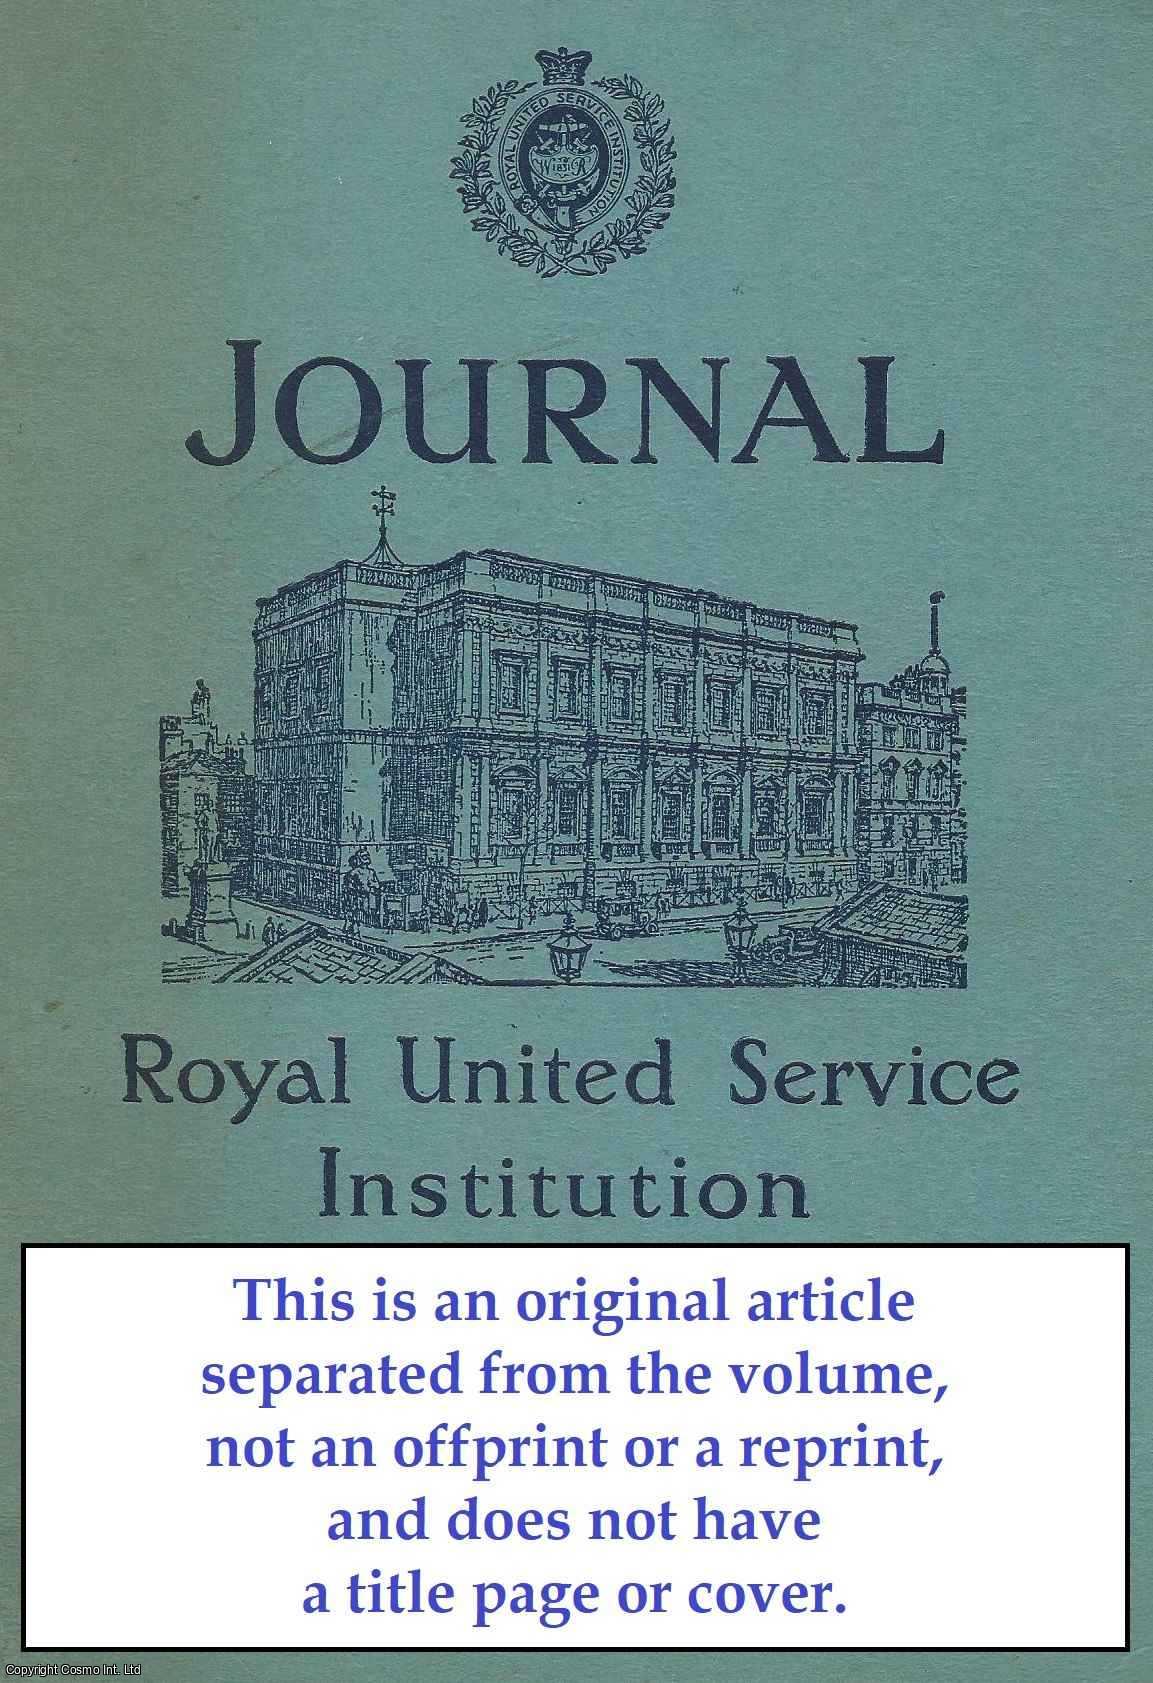 Lord Balniel - Britain's Role in South East Asia: The Five-Power Agreement. An original article from The Journal of The Royal United Services Institute for Defence Studies, 1972.